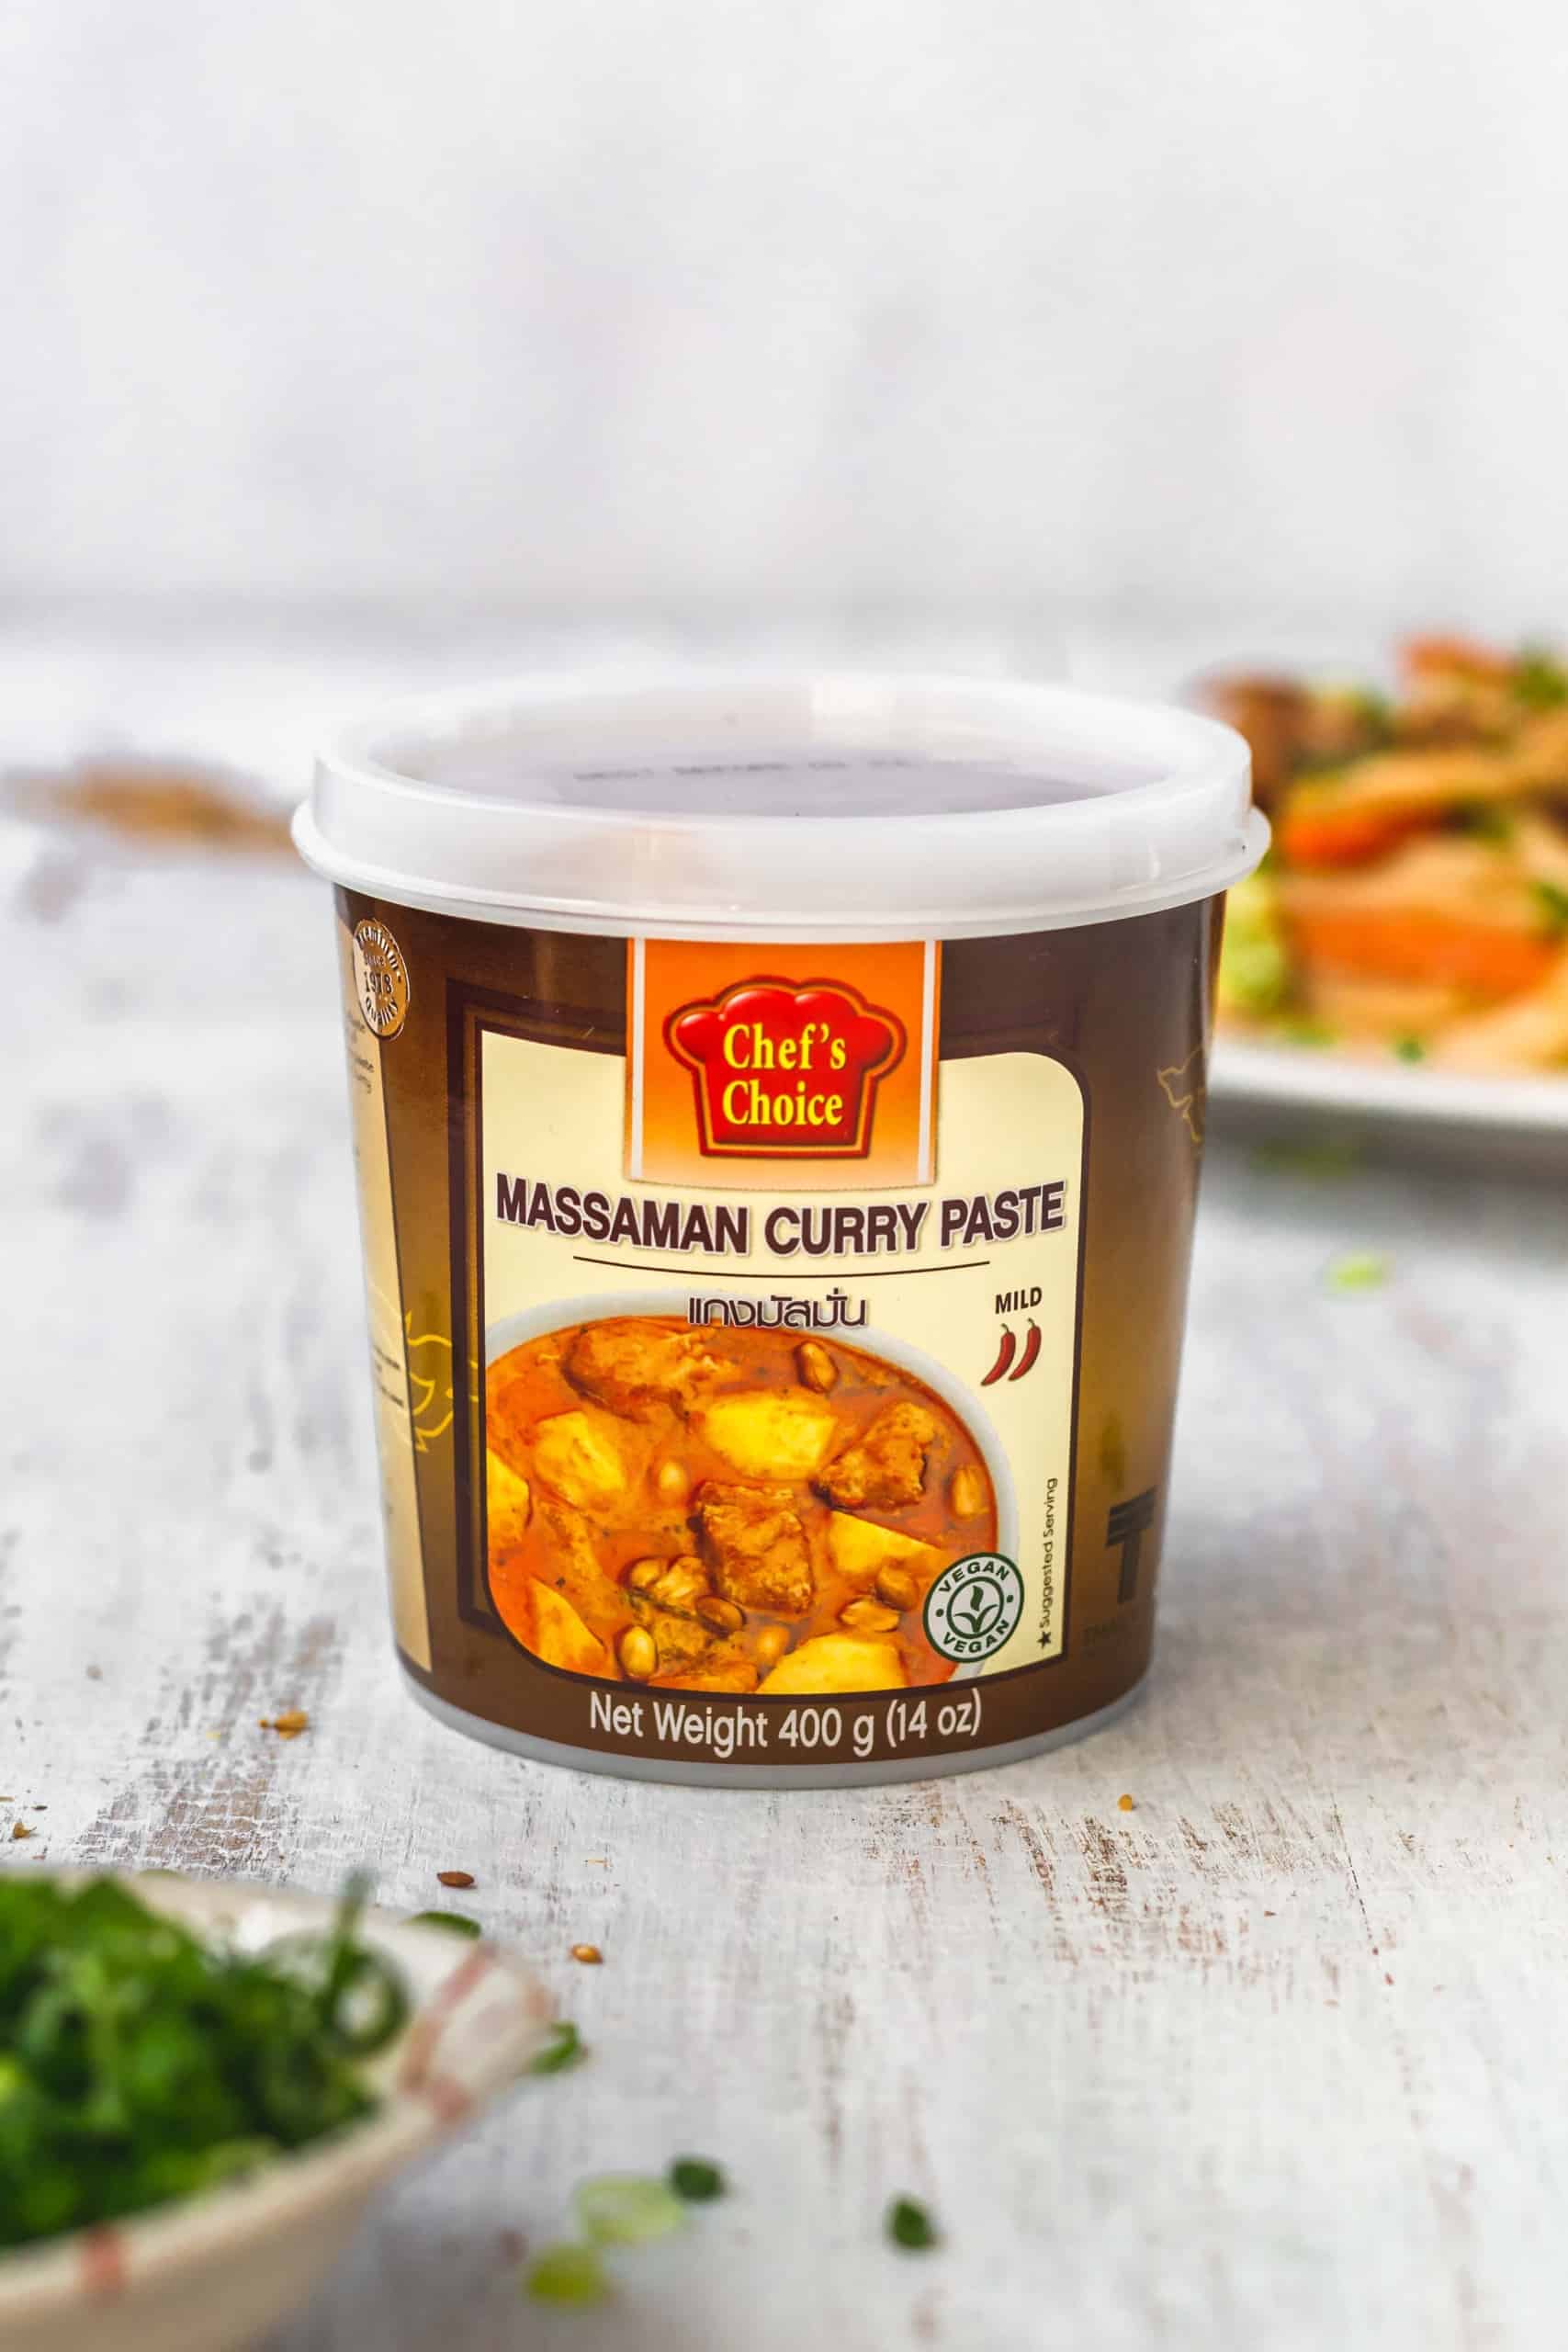 A tub of massaman curry paste